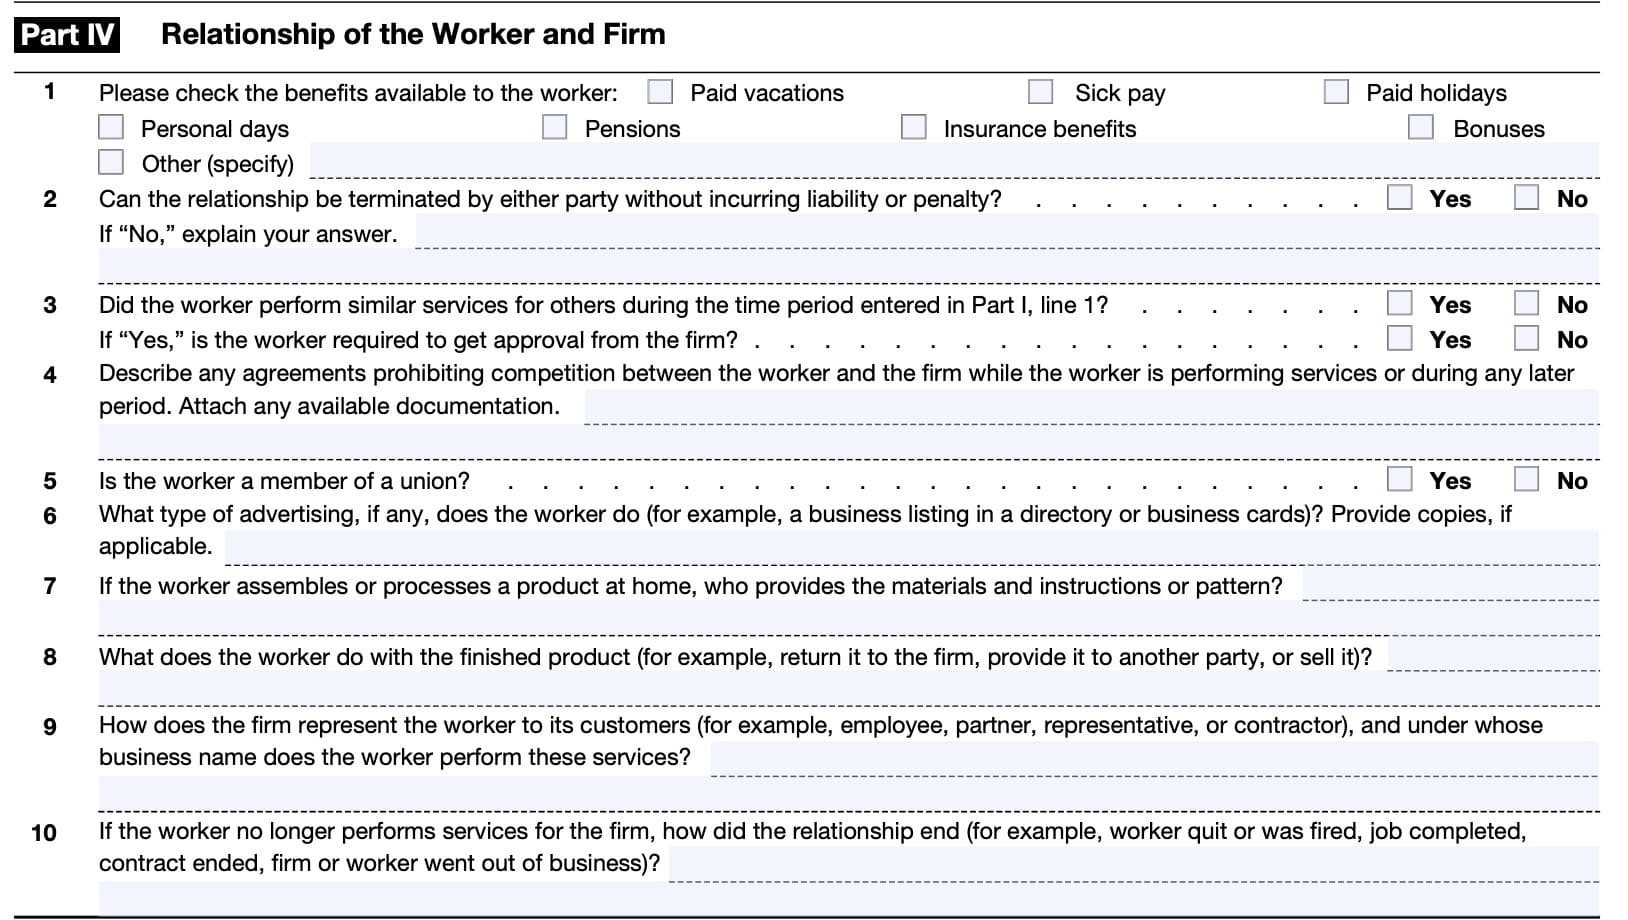 form ss-8, part IV, relationship of the worker and the firm